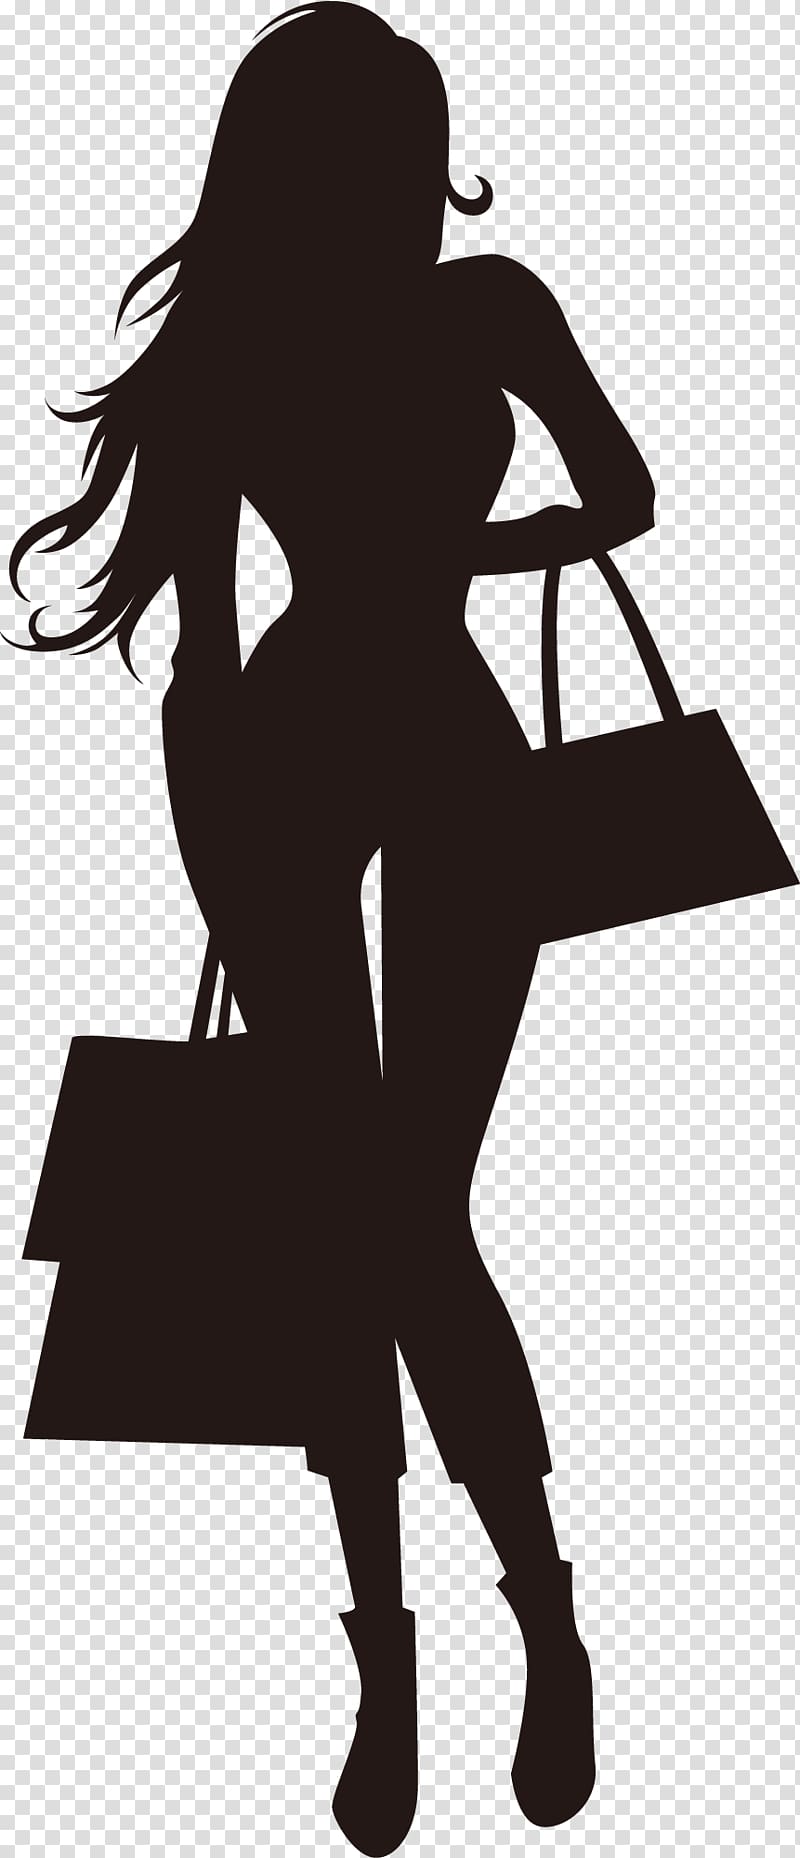 silhouette of woman carrying tote bags illustration, Fashion Silhouette , Fashion shopping girl silhouette transparent background PNG clipart